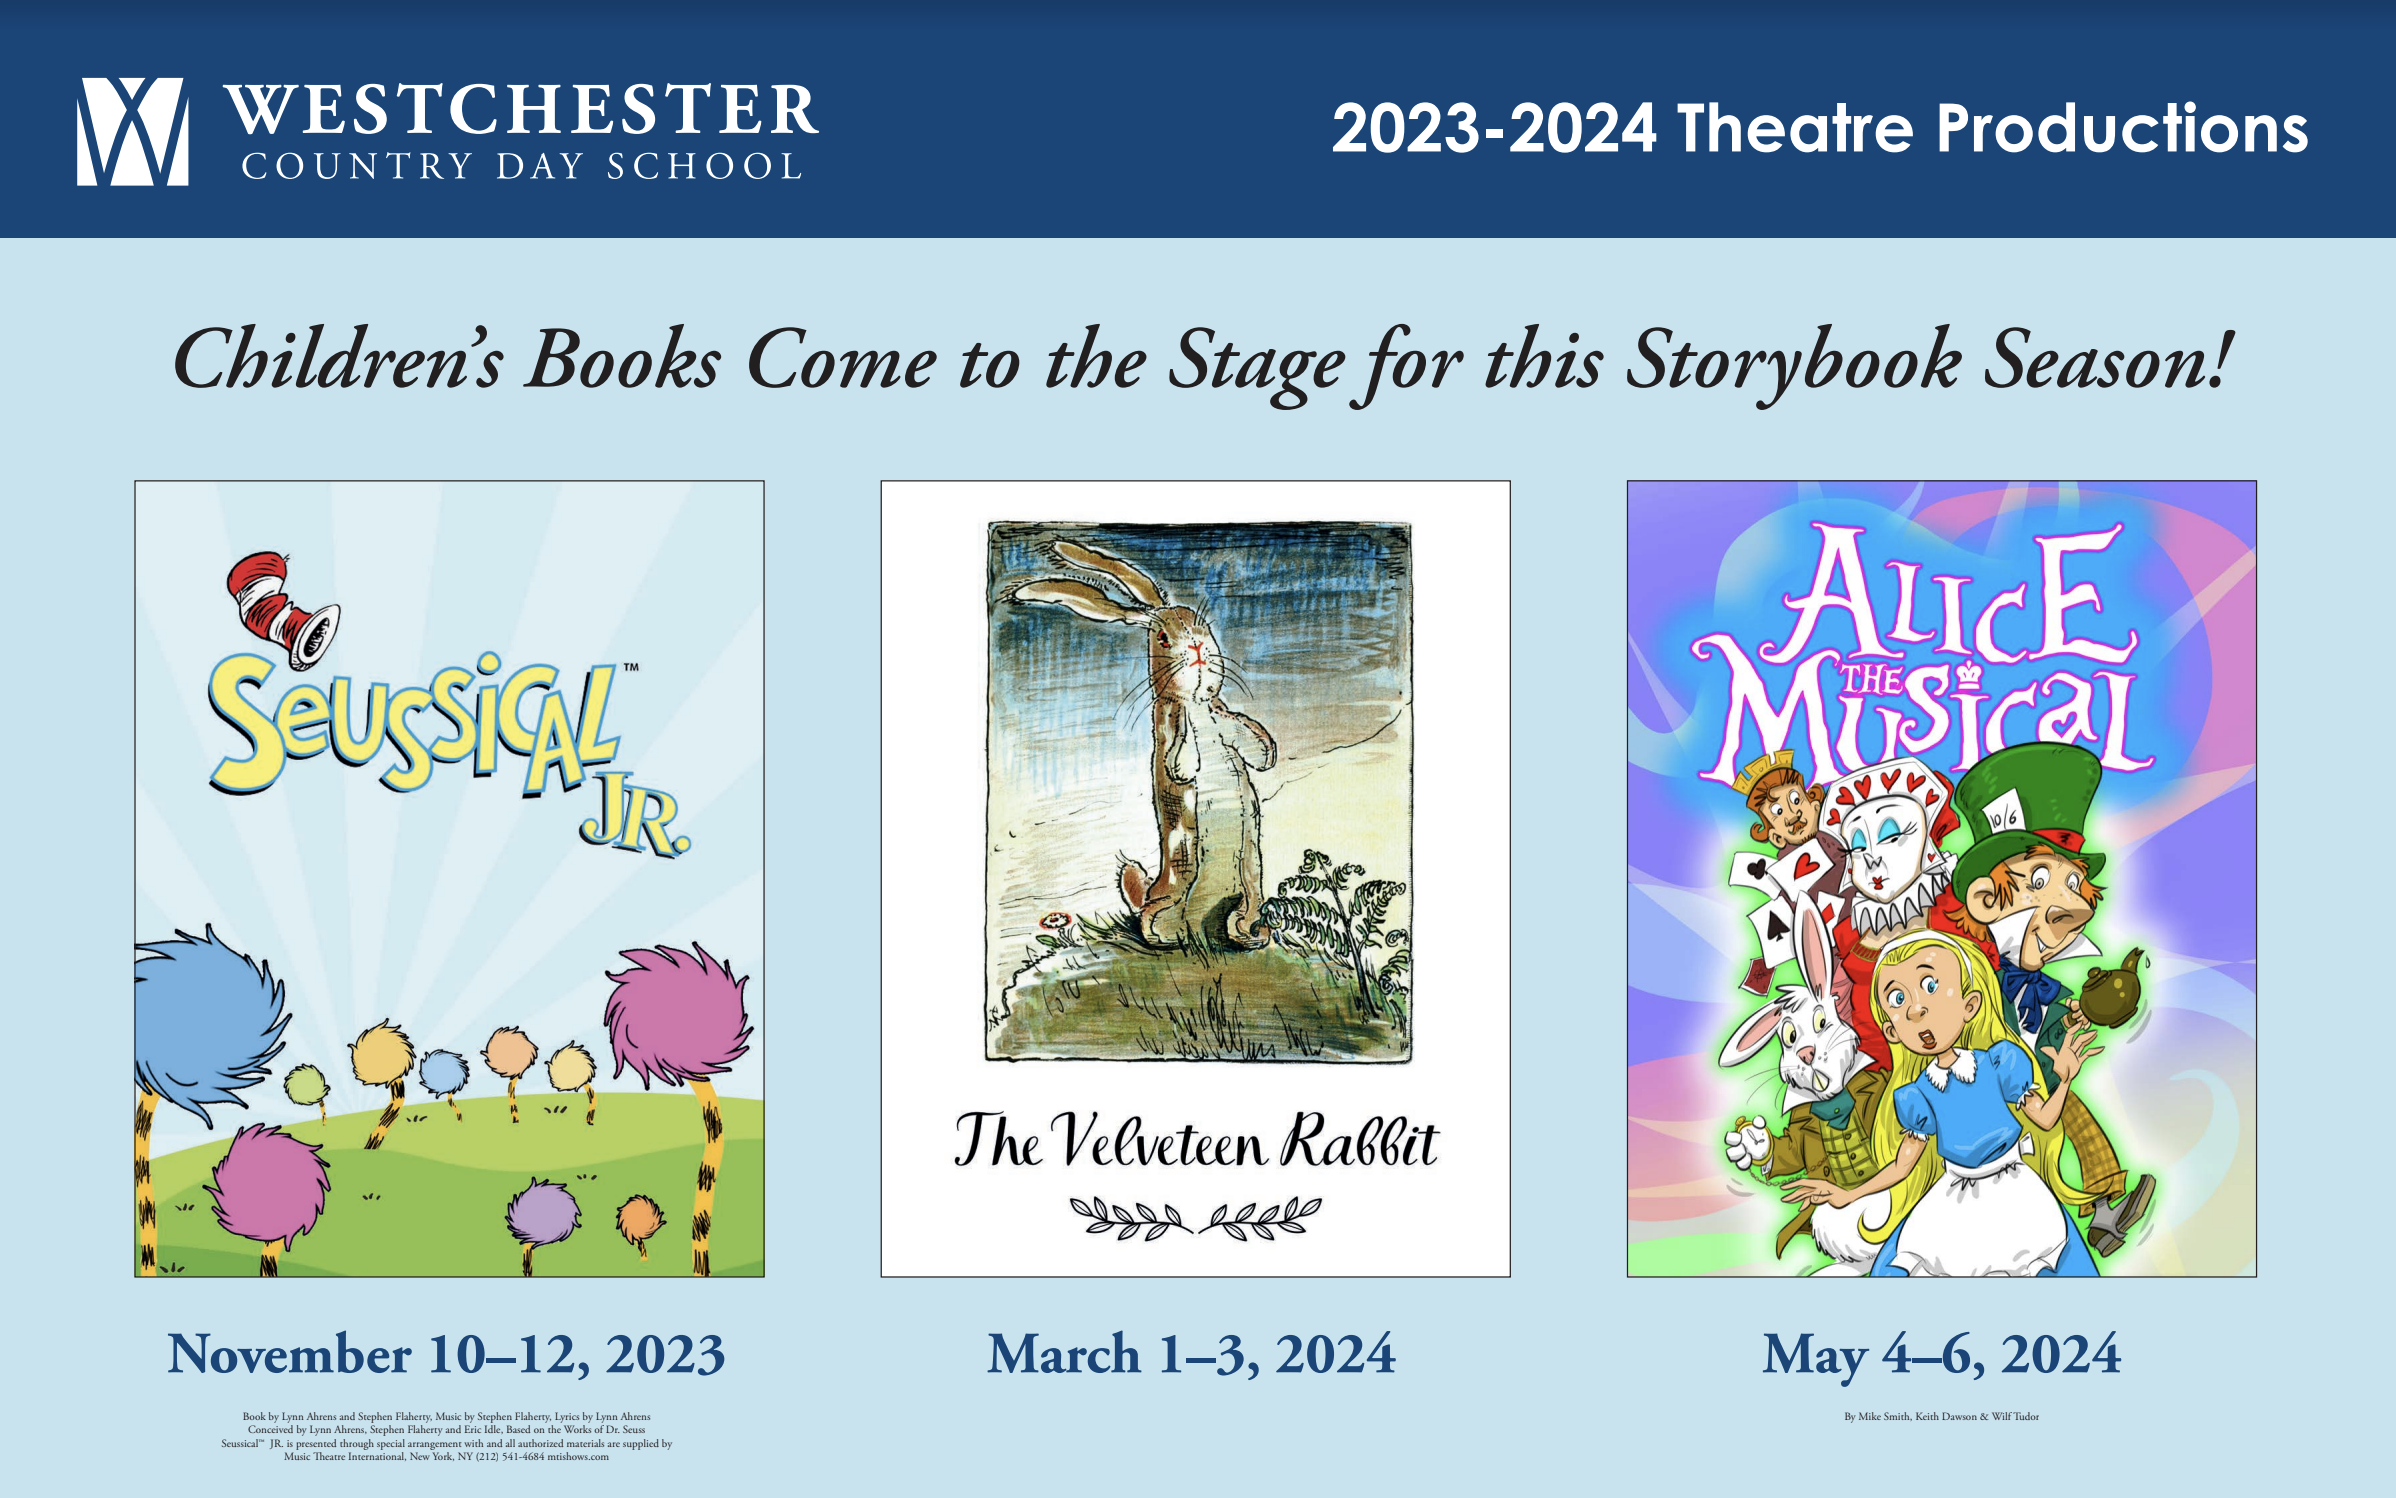 2023-2024 theatre productions poster